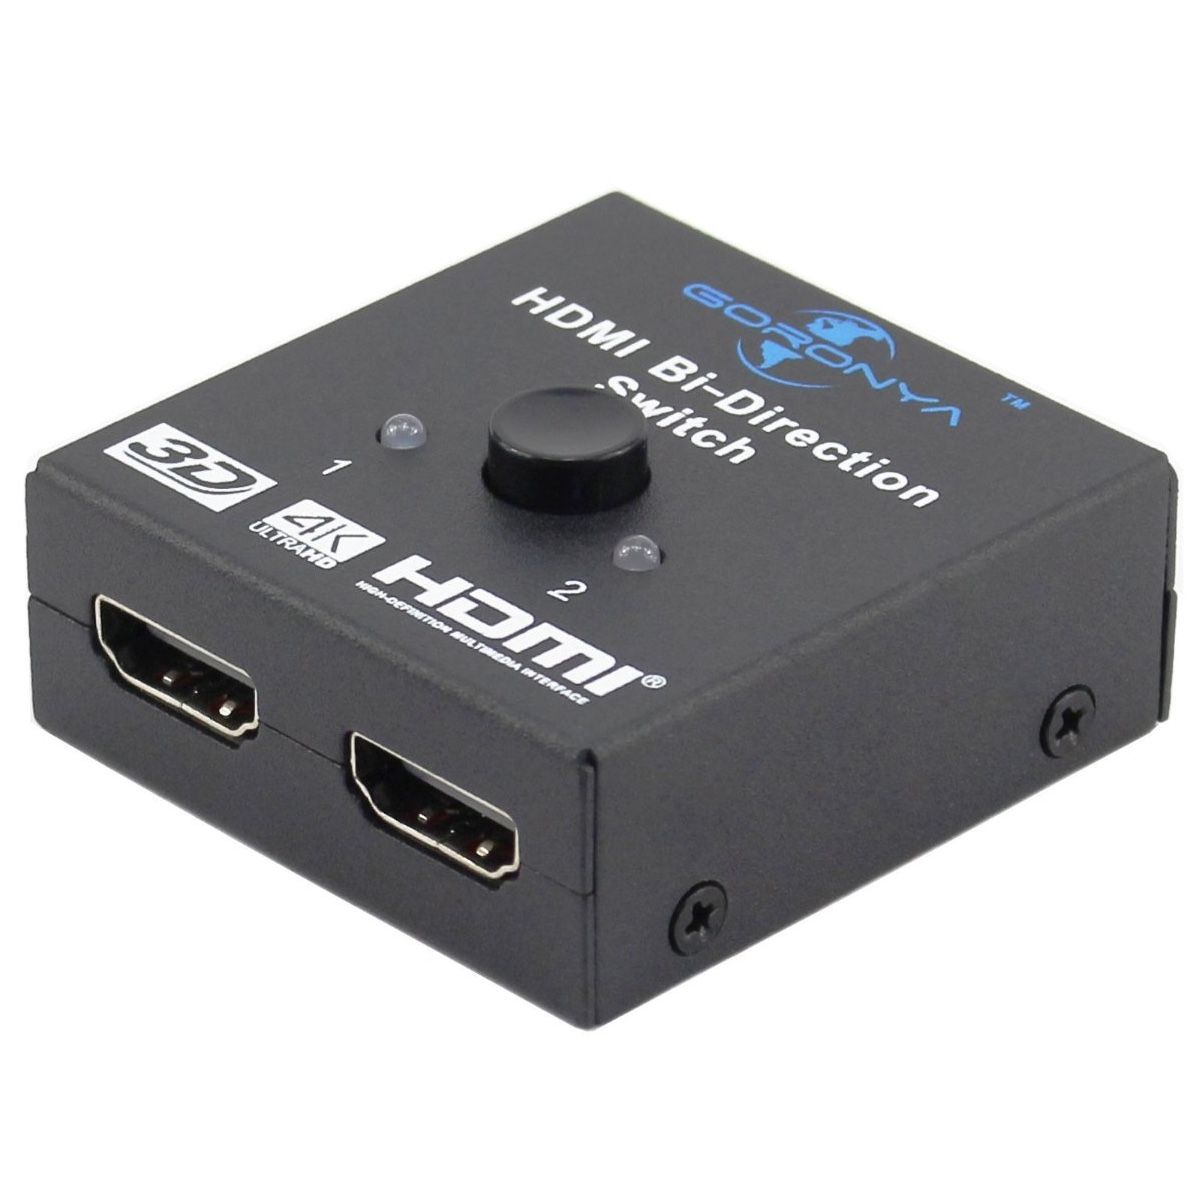 best hdmi switch with optical out